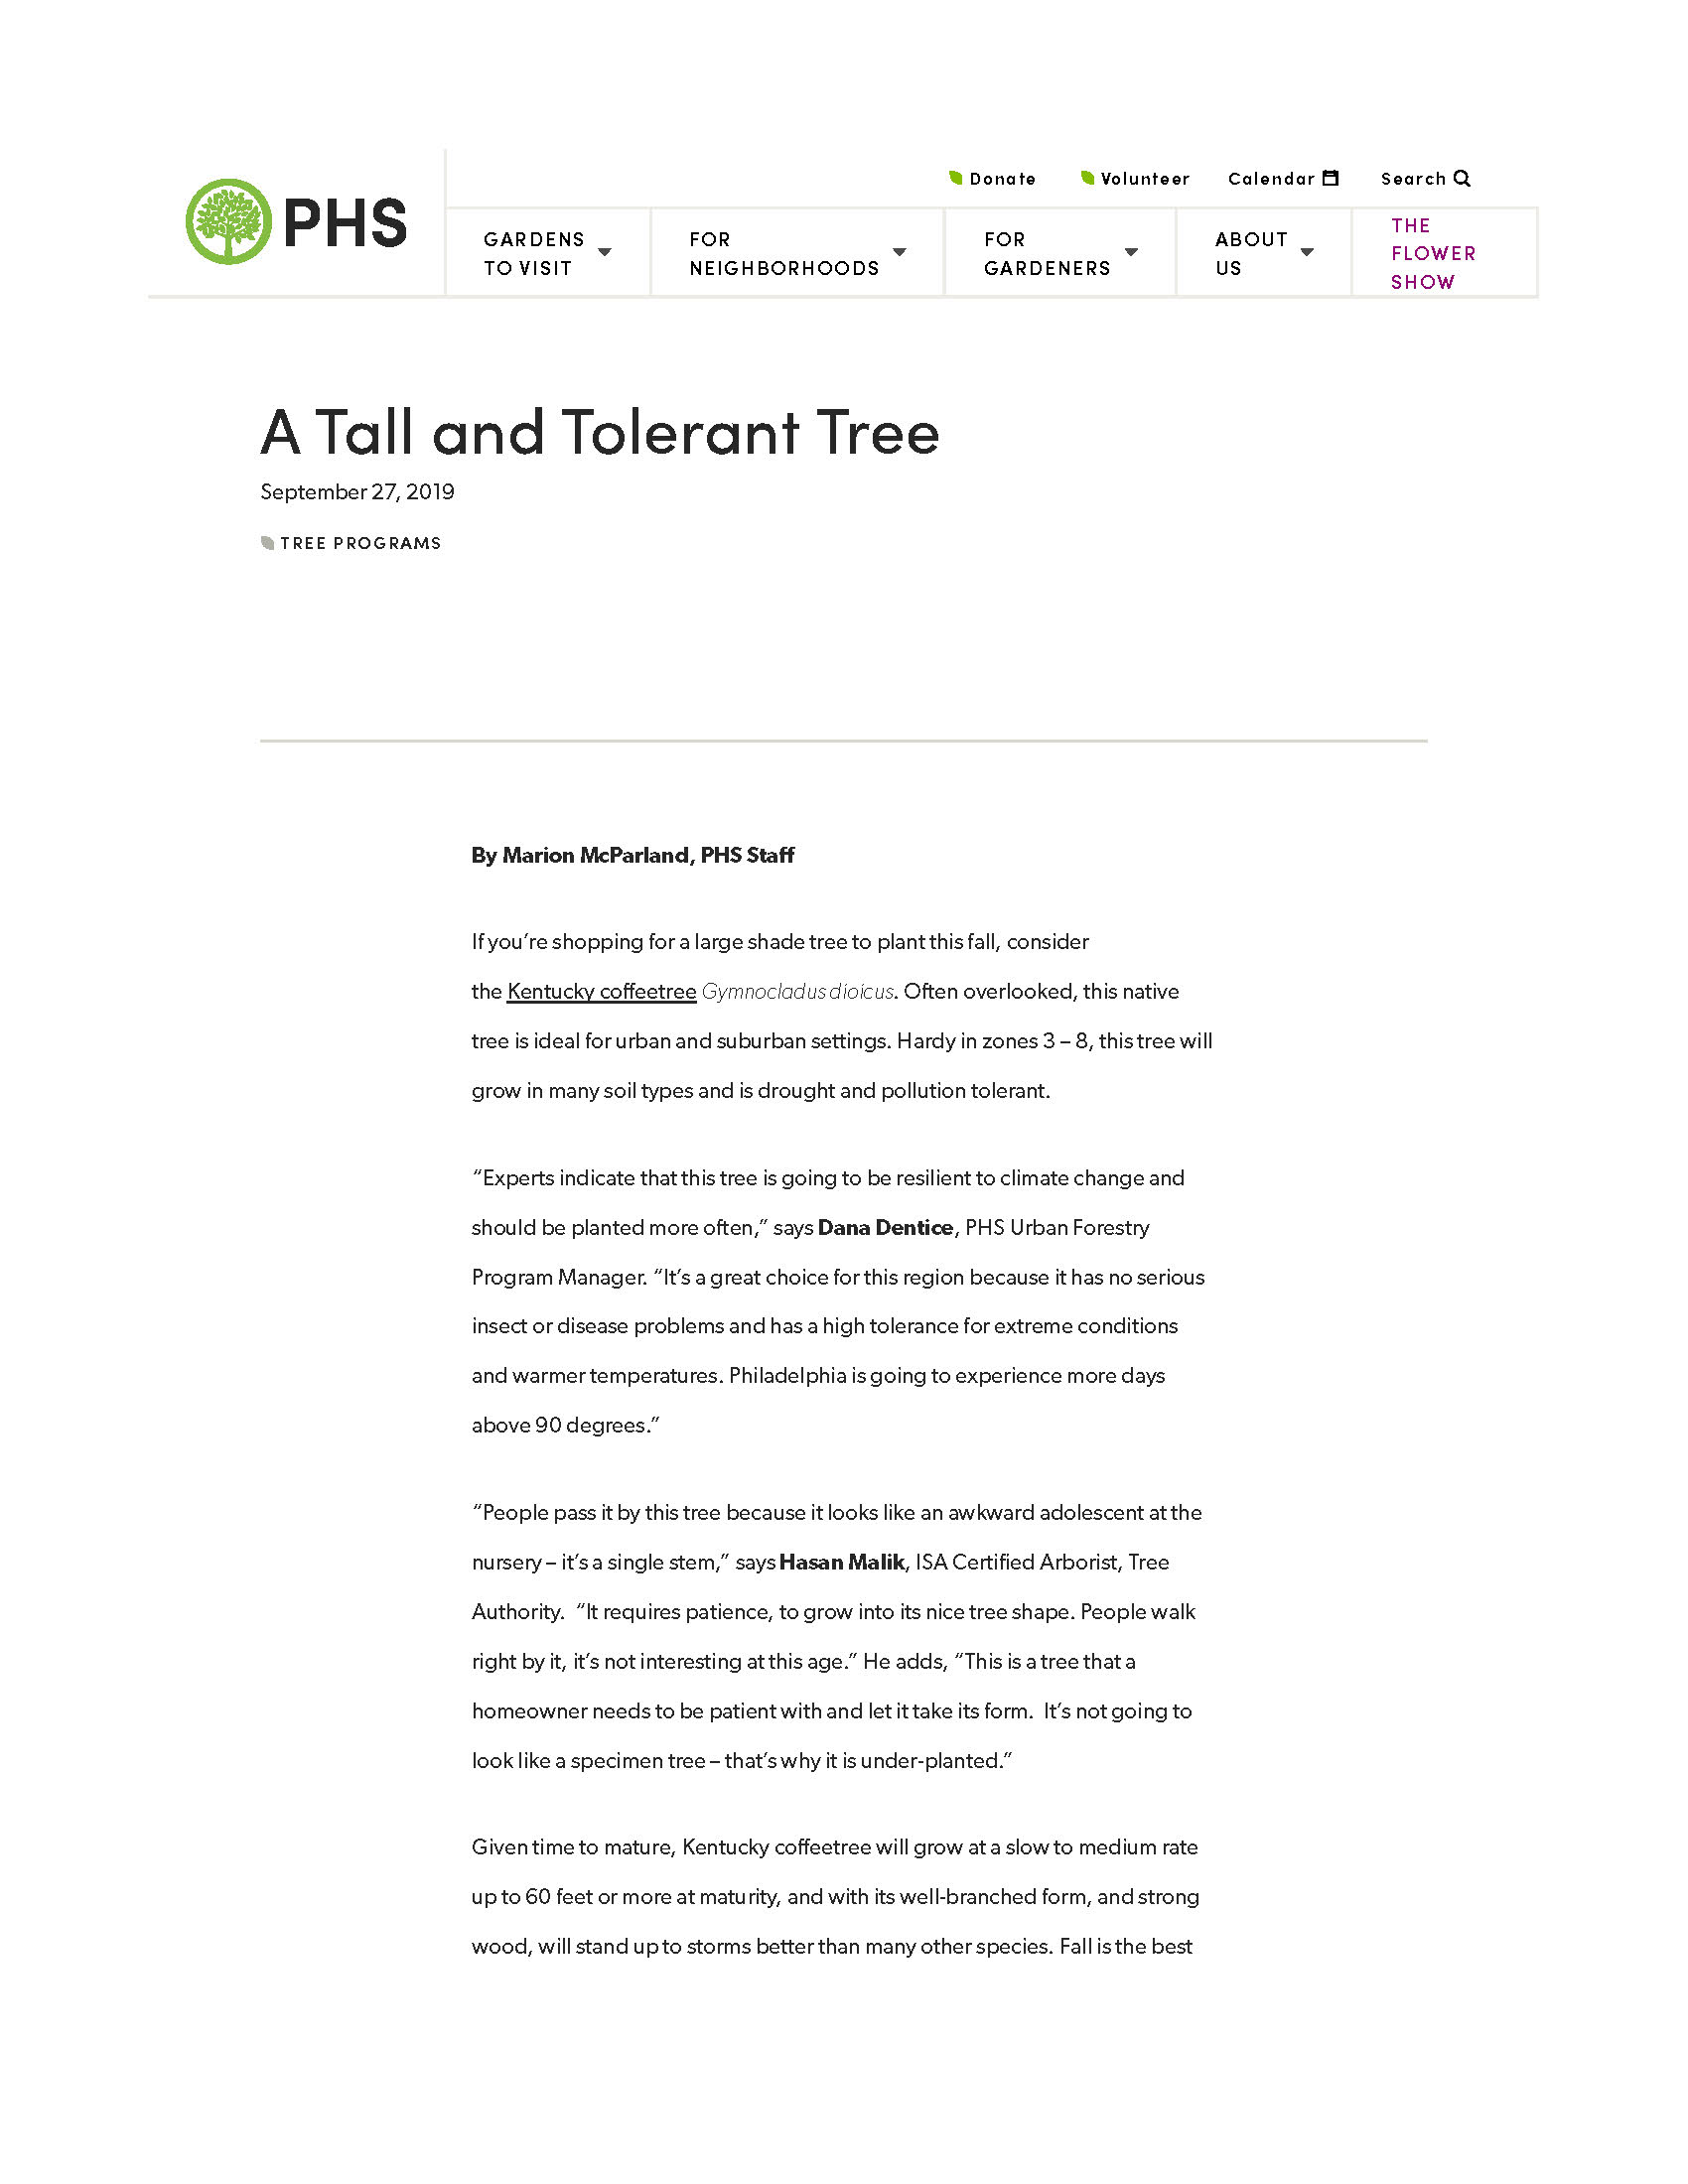 A Tall and Tolerant Tree